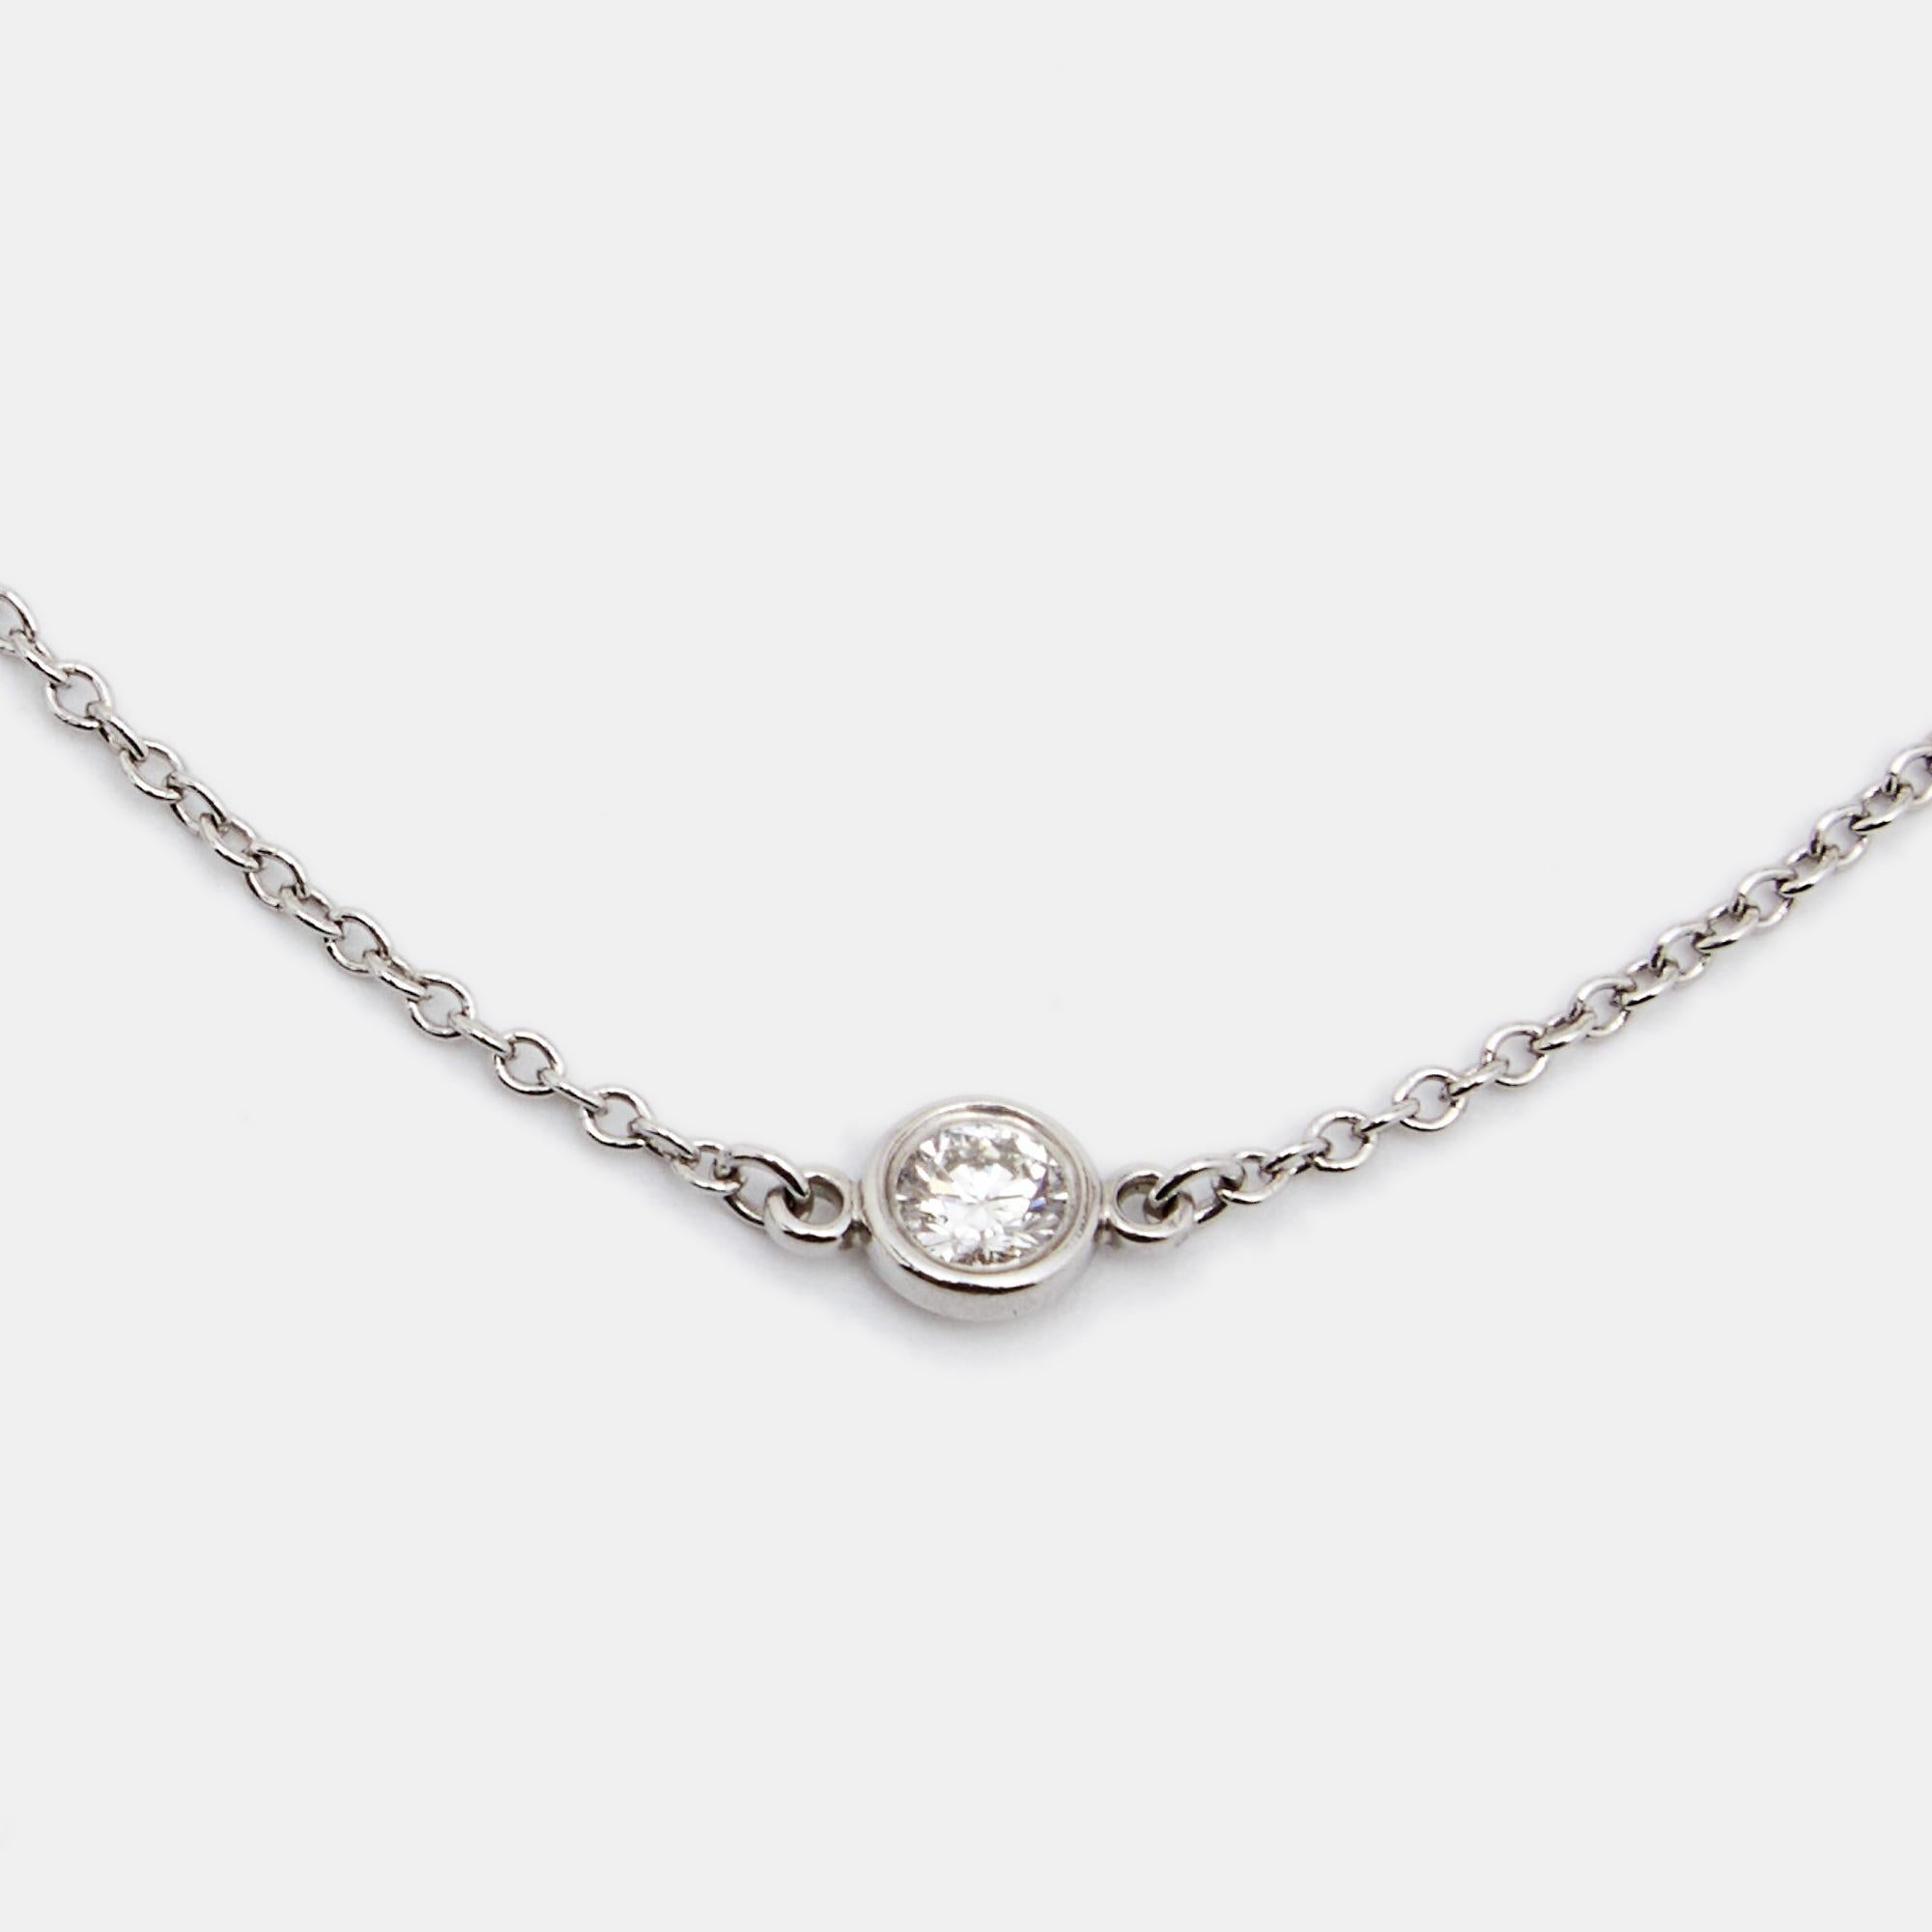 With its minimal appeal, the Tiffany & Co. bracelet will shine on your wrist. It comes from their Diamond By The Yard collection by Elsa Peretti. The creation has been sculpted using precious platinum and accentuated by a single diamond in the